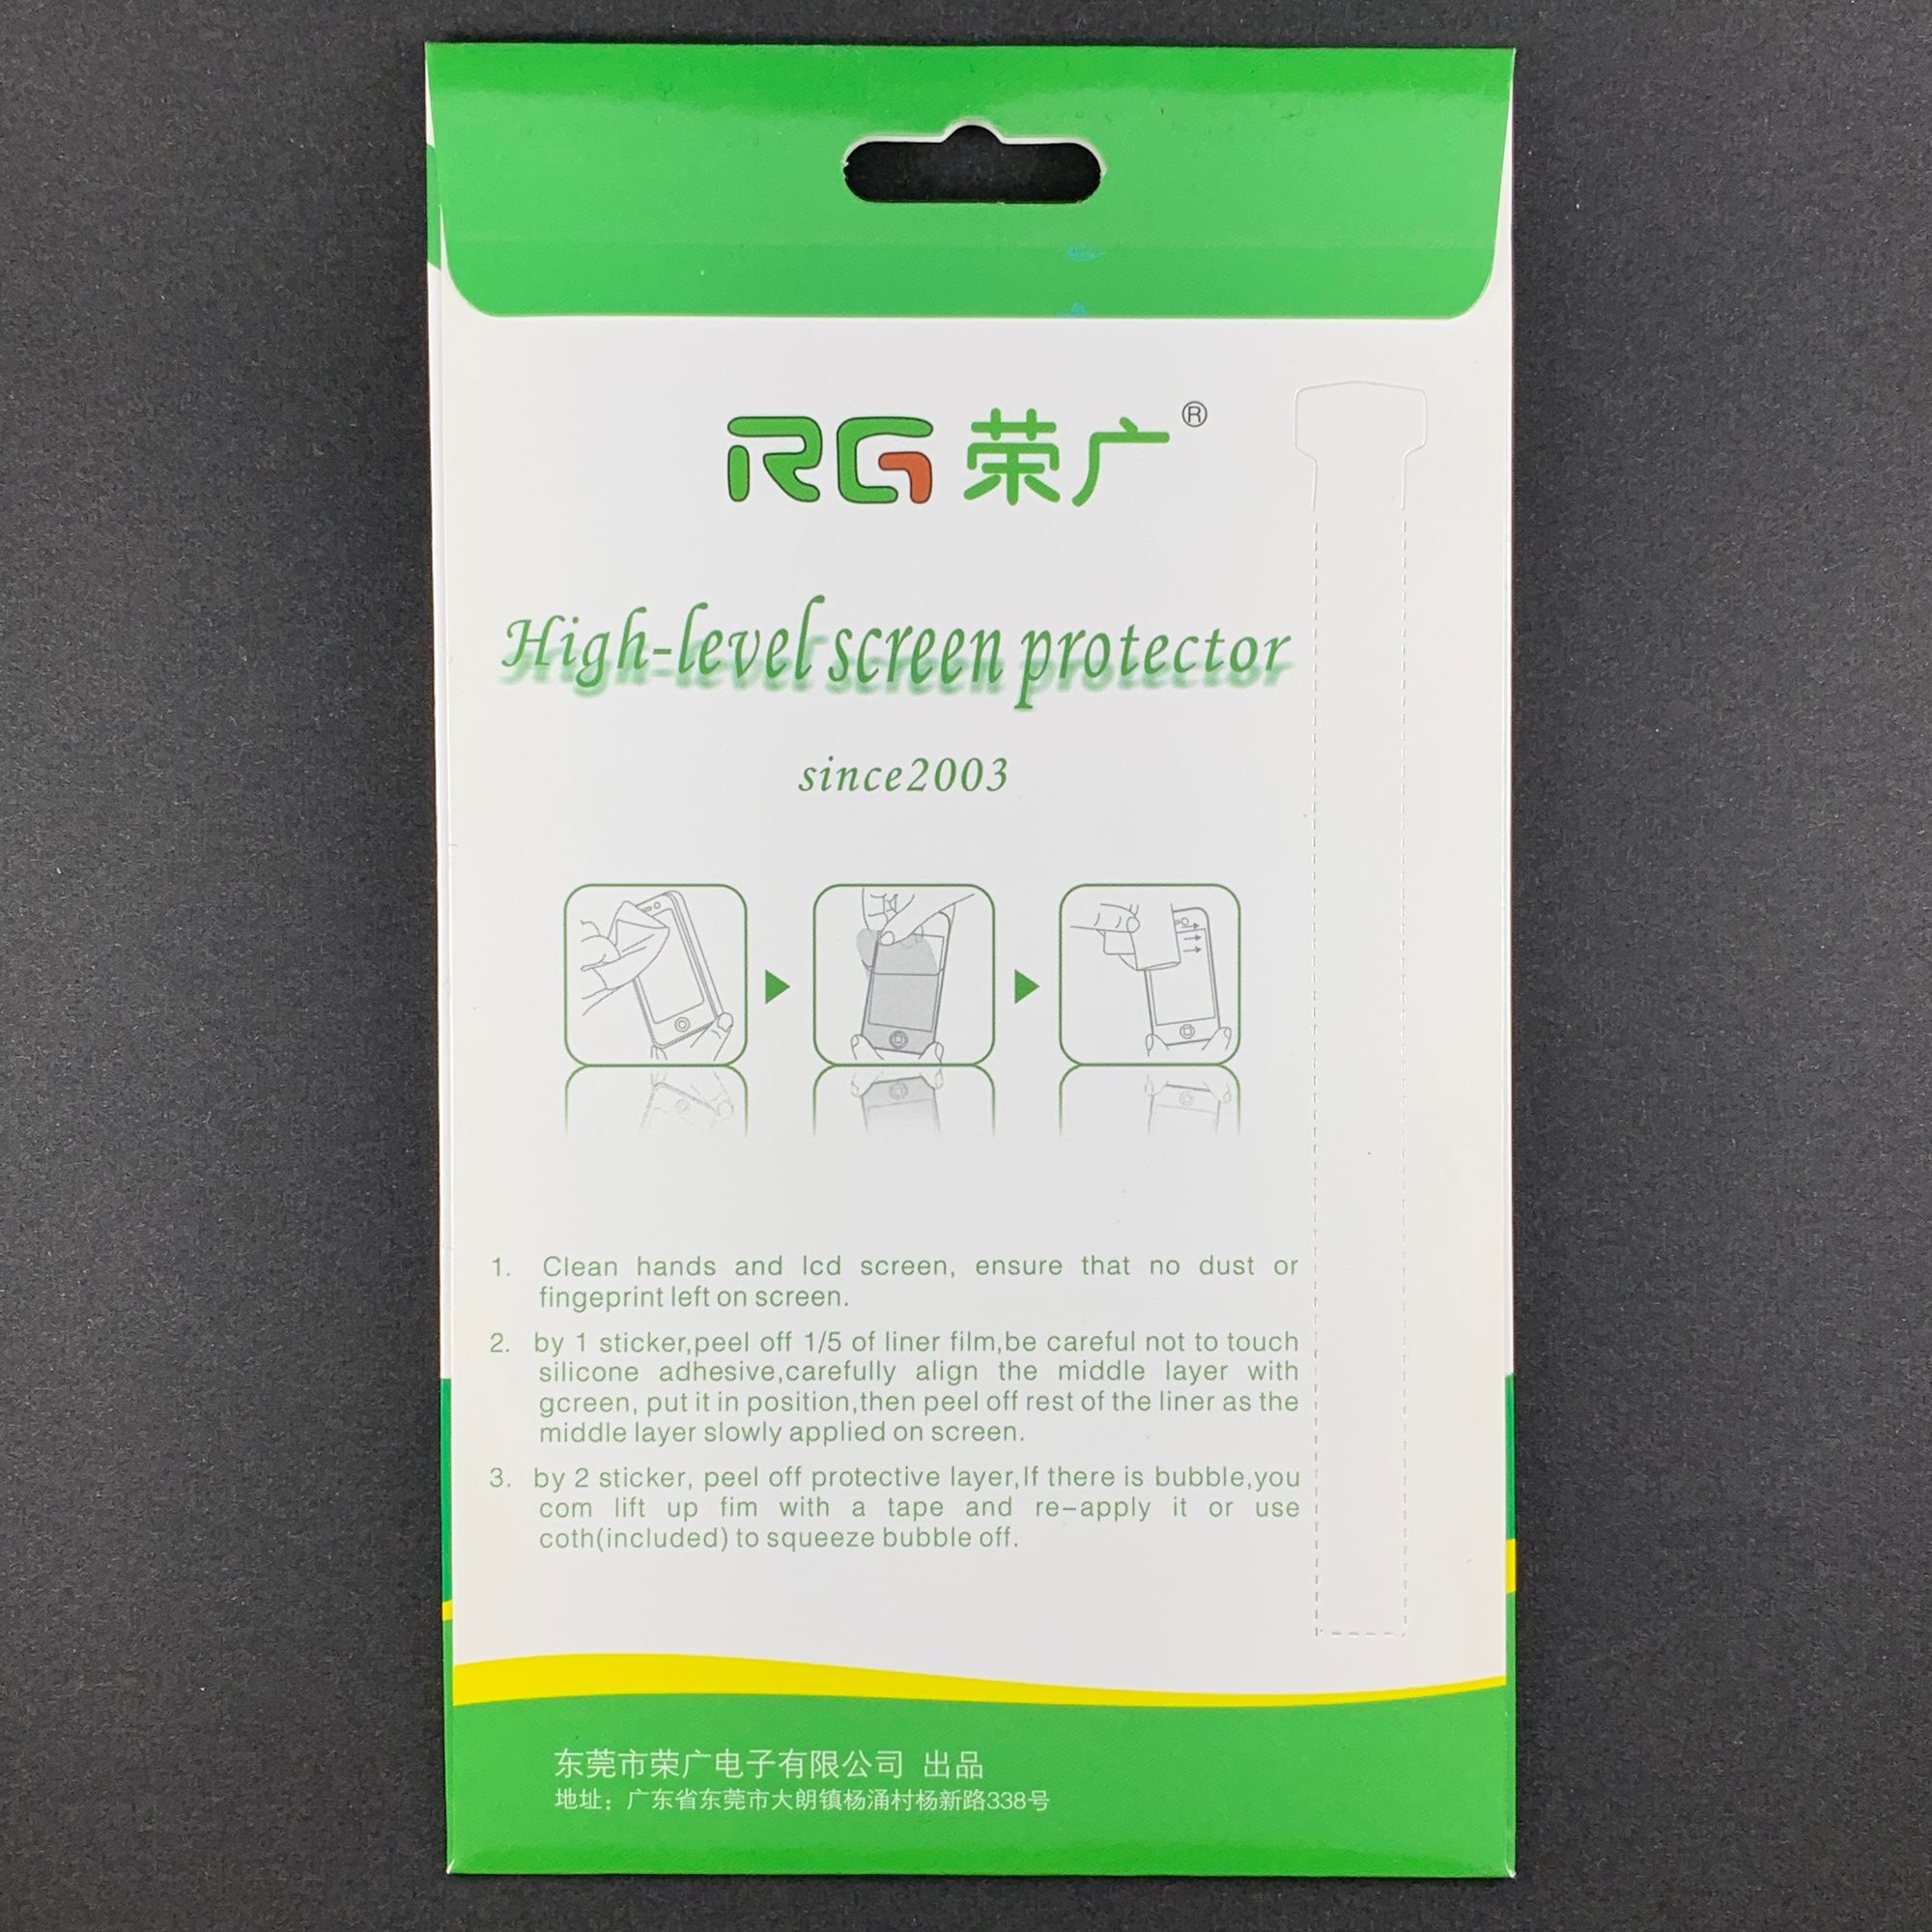 RG Professional Soft Film Screen Protector for iPad 2 / 3 / 4 (MATTE, 2-PACK)